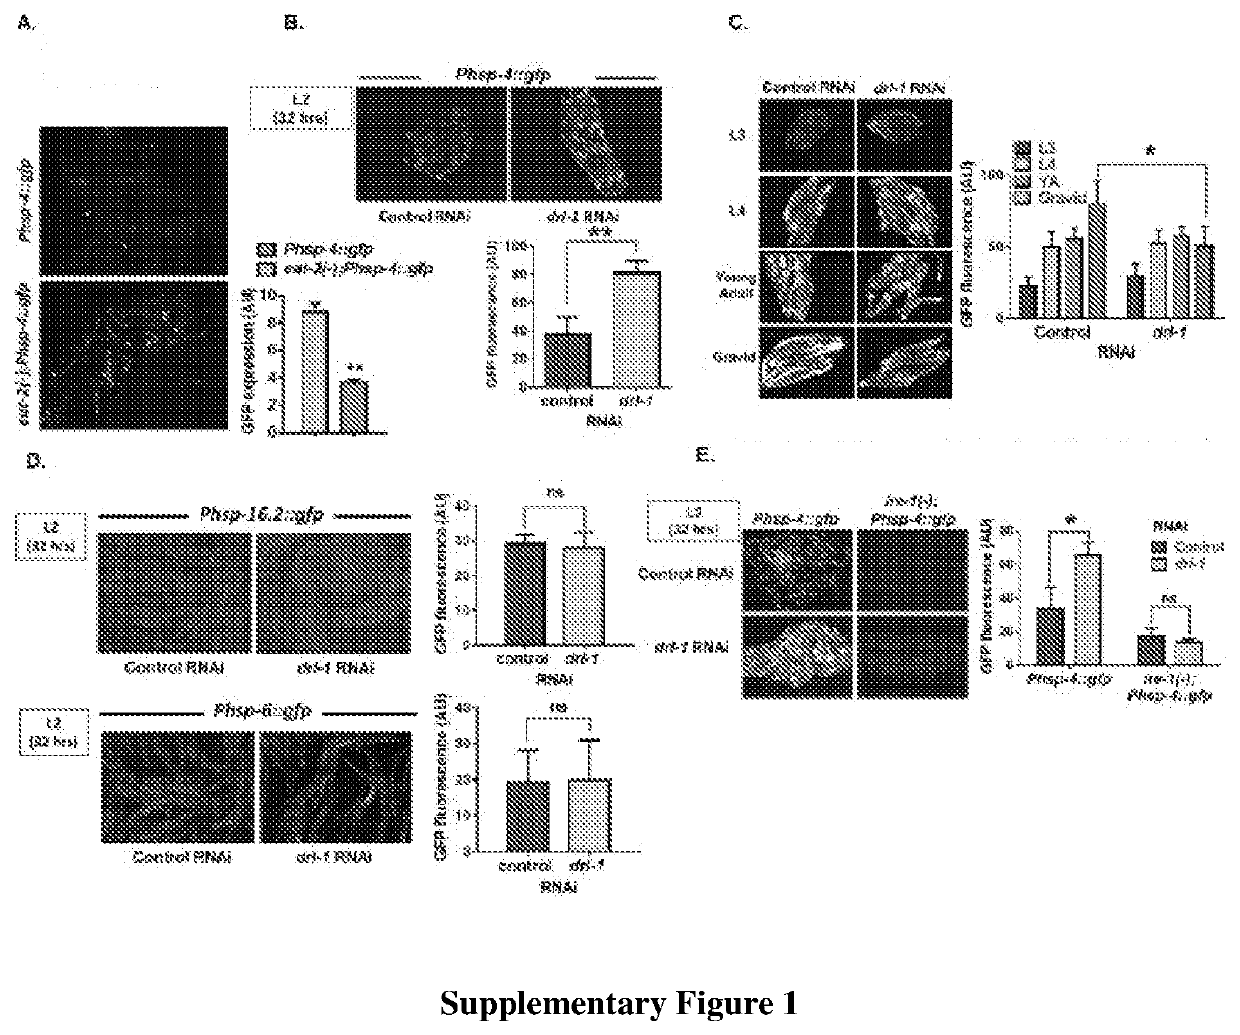 A method of mimicking benefits of dietary restriction by transiently upregulating er stress response